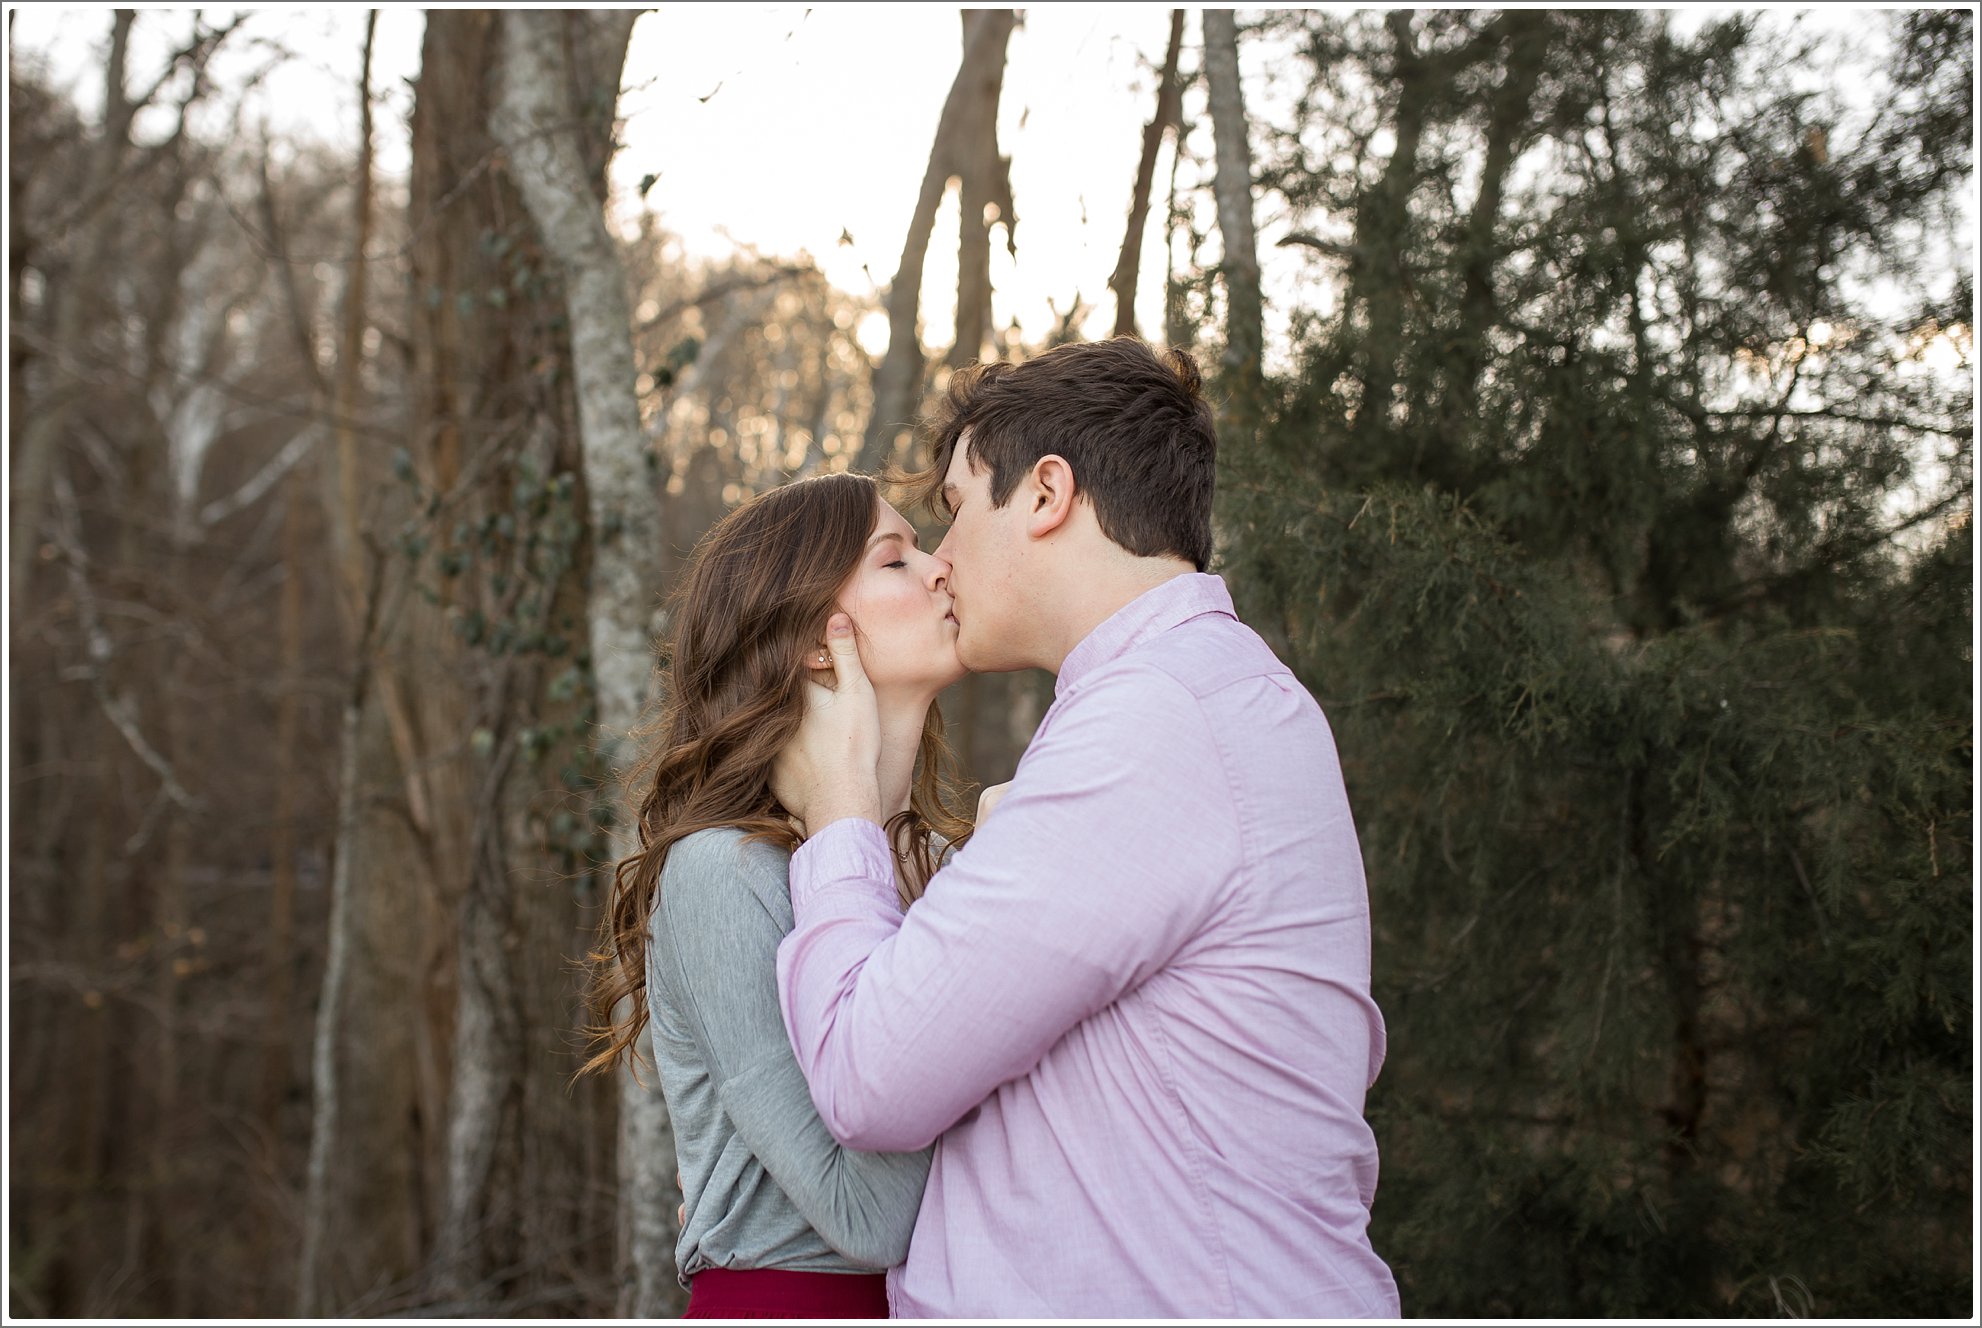 Early Spring Nashville engagement session by the lake at Radnor Lake. Golden sunset and beautiful spring flowering trees were used as the backdrop. 